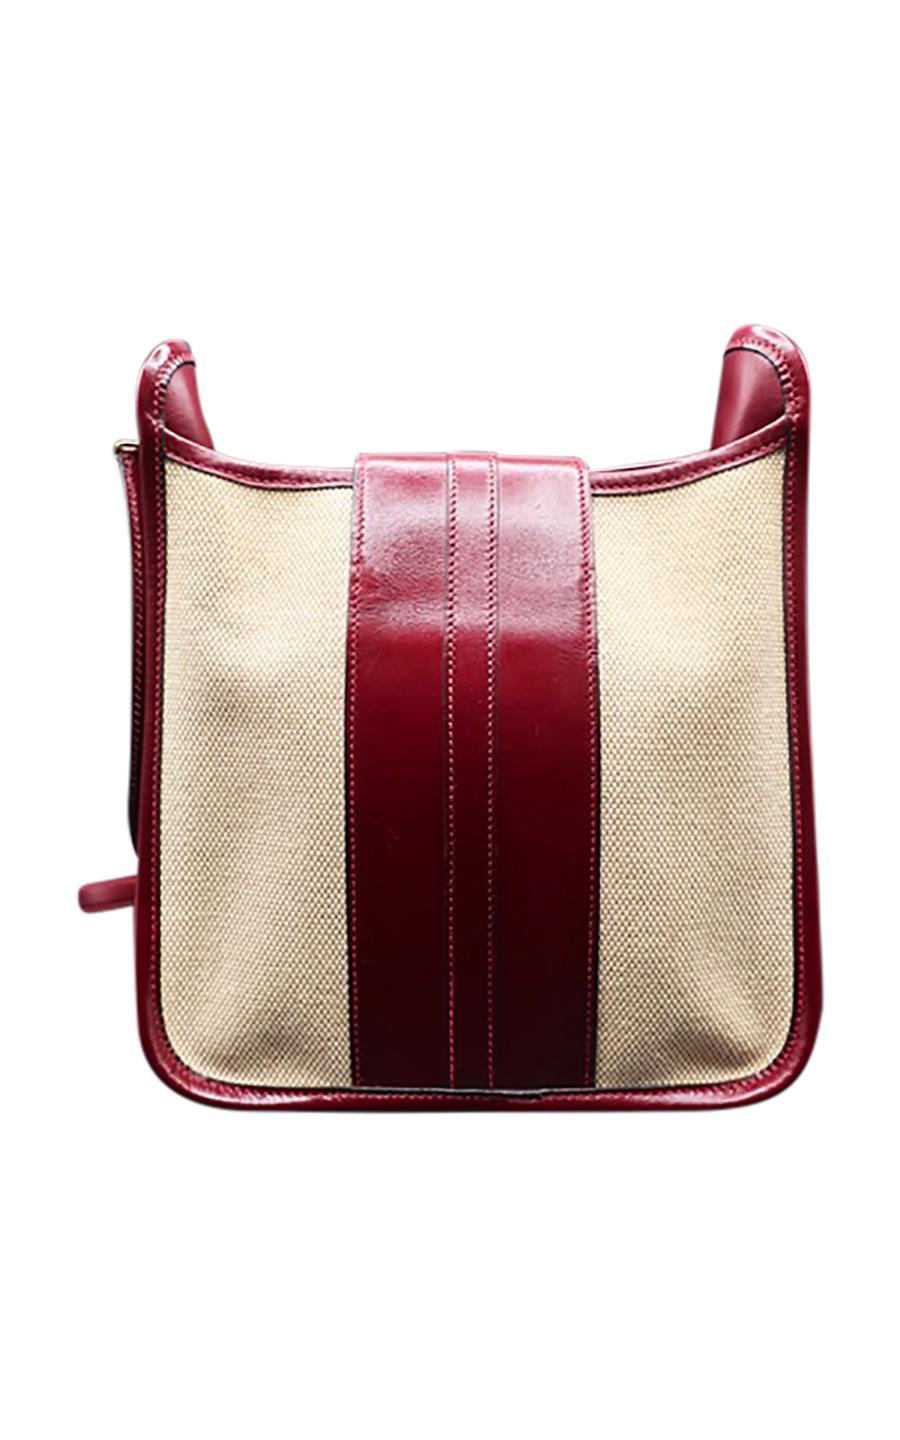 Vintage Hermès 1980 collection beige canvas and burgundy leather shoulder bag, in excellent pre-loved condition. Like the famous Evelyne model, it comes in a square, box shape, with a canvas body lined with burgundy-shade leather. It closes with a